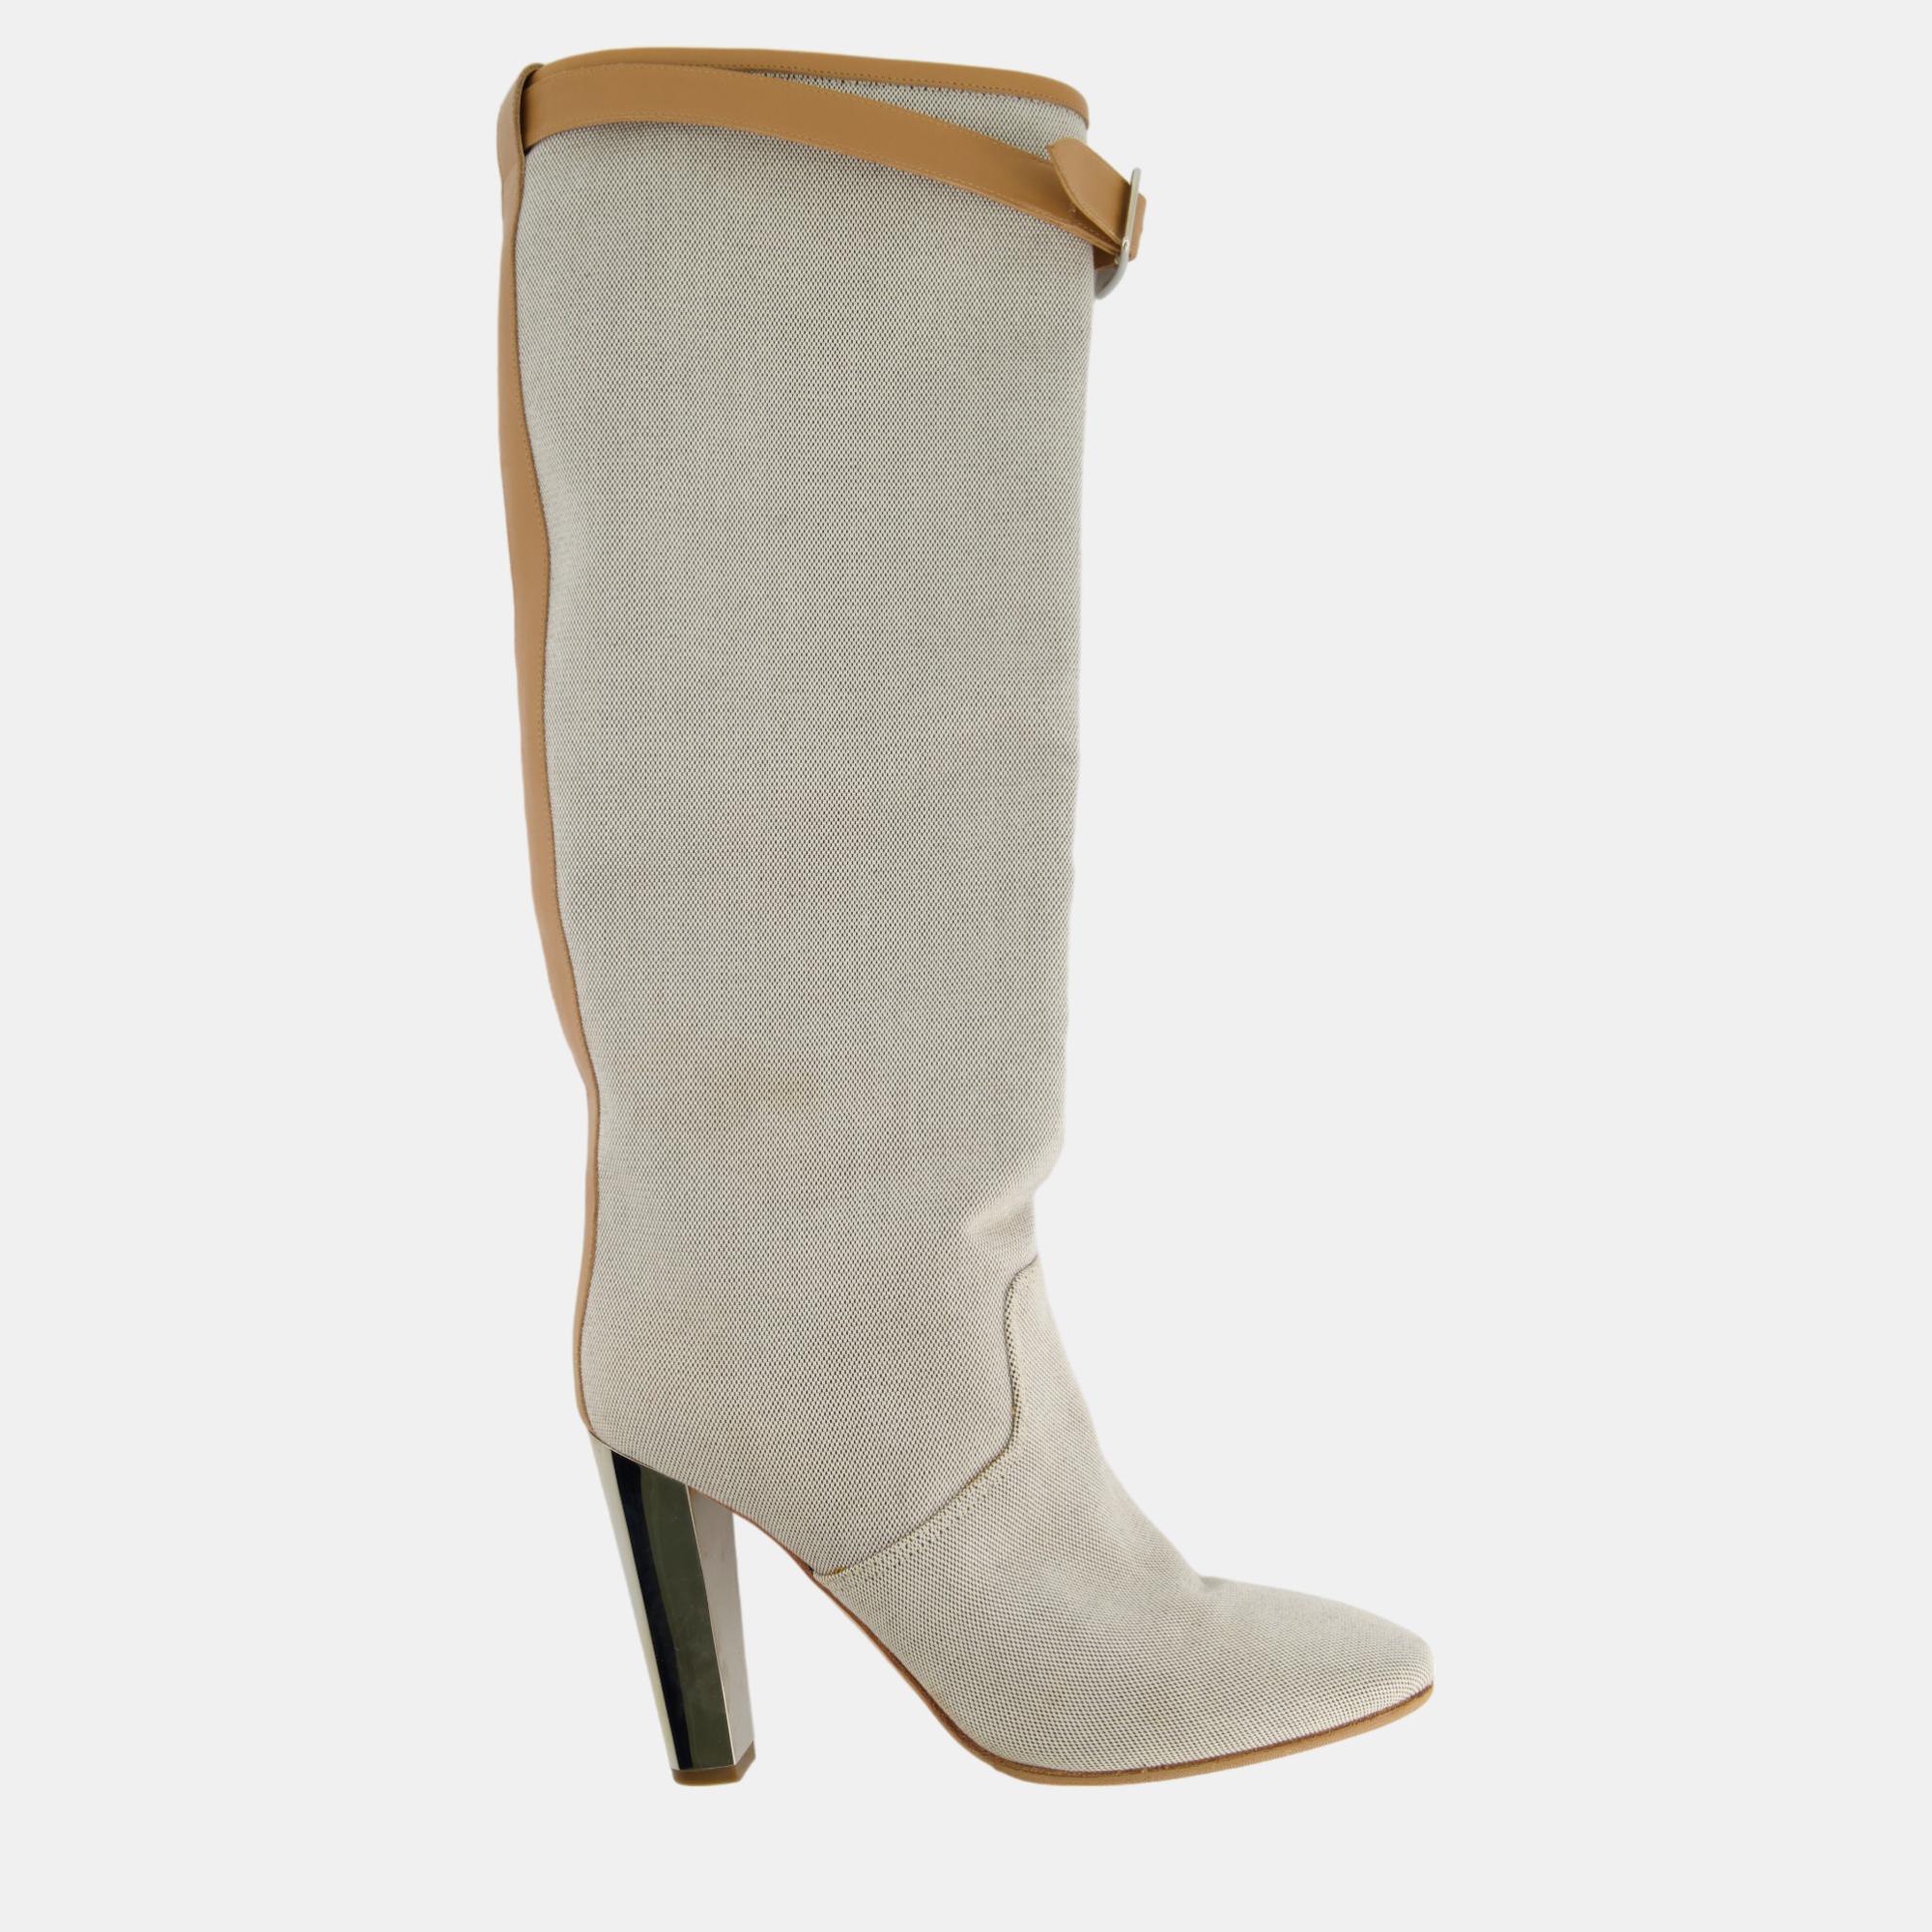 Hermes stone canvas knee high boots with tan buckle detail size eu 38